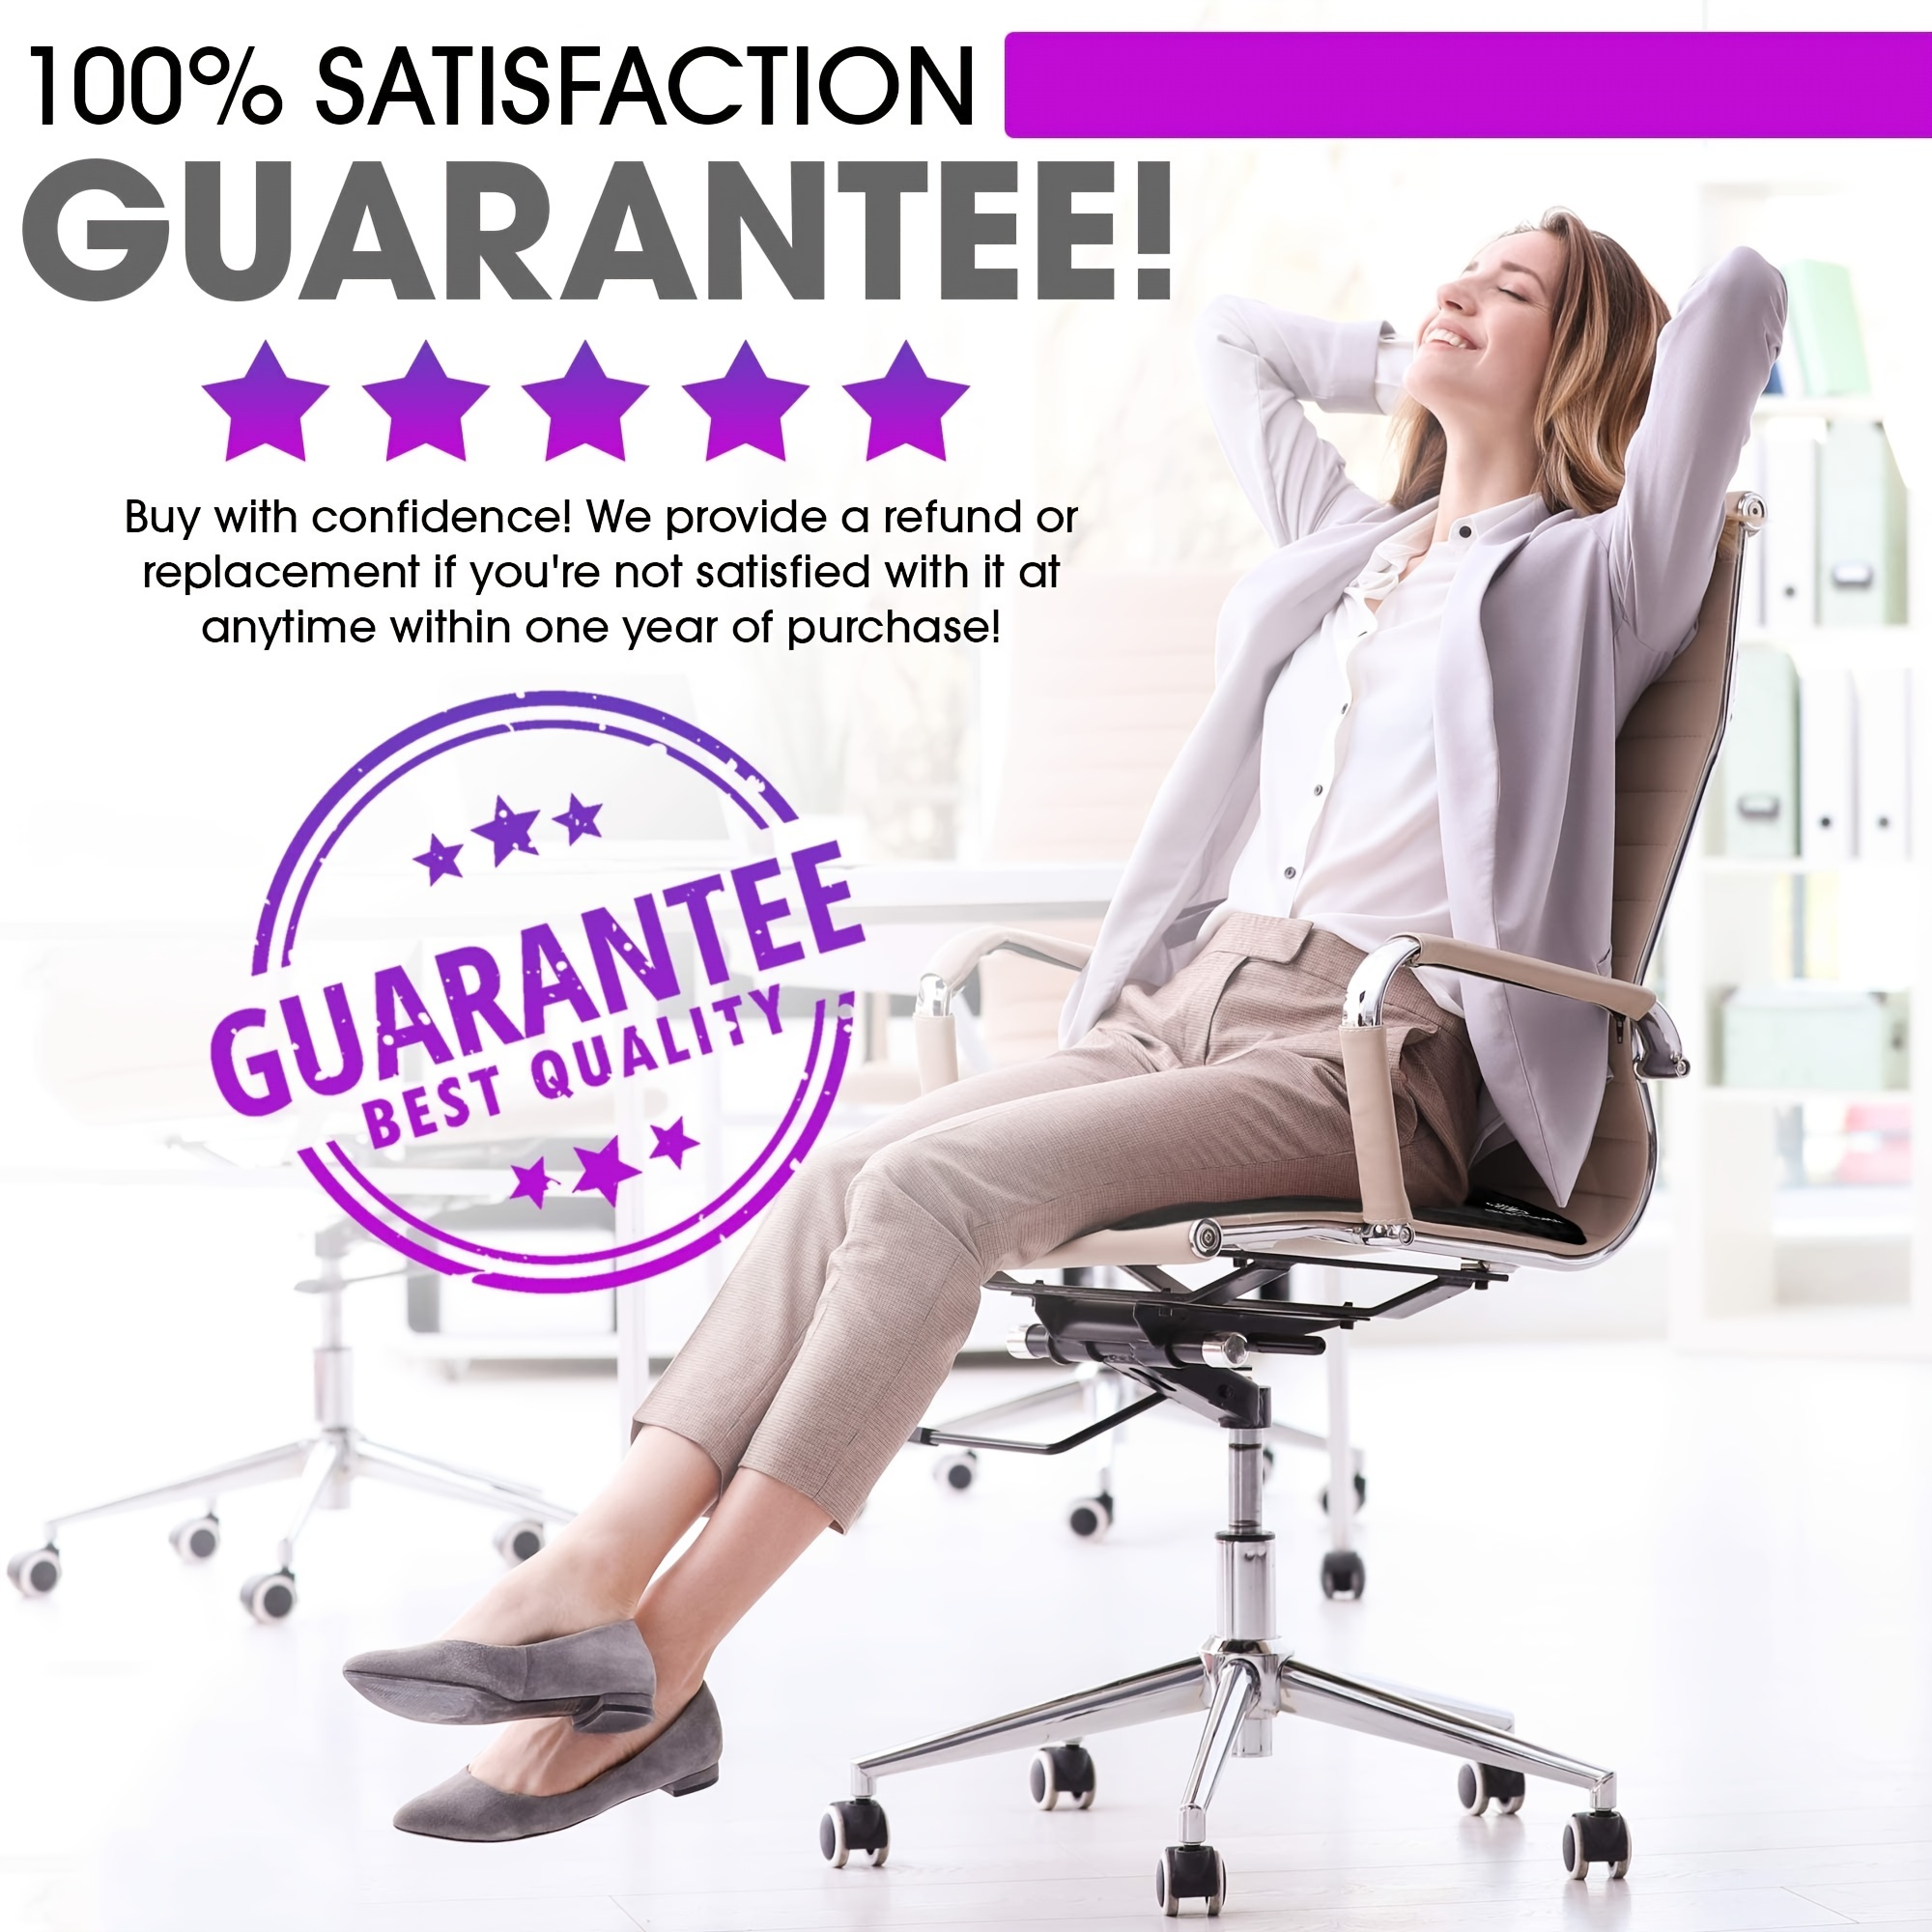 Sciatica Chair - Our Best Chair for Sciatica Nerve Issues